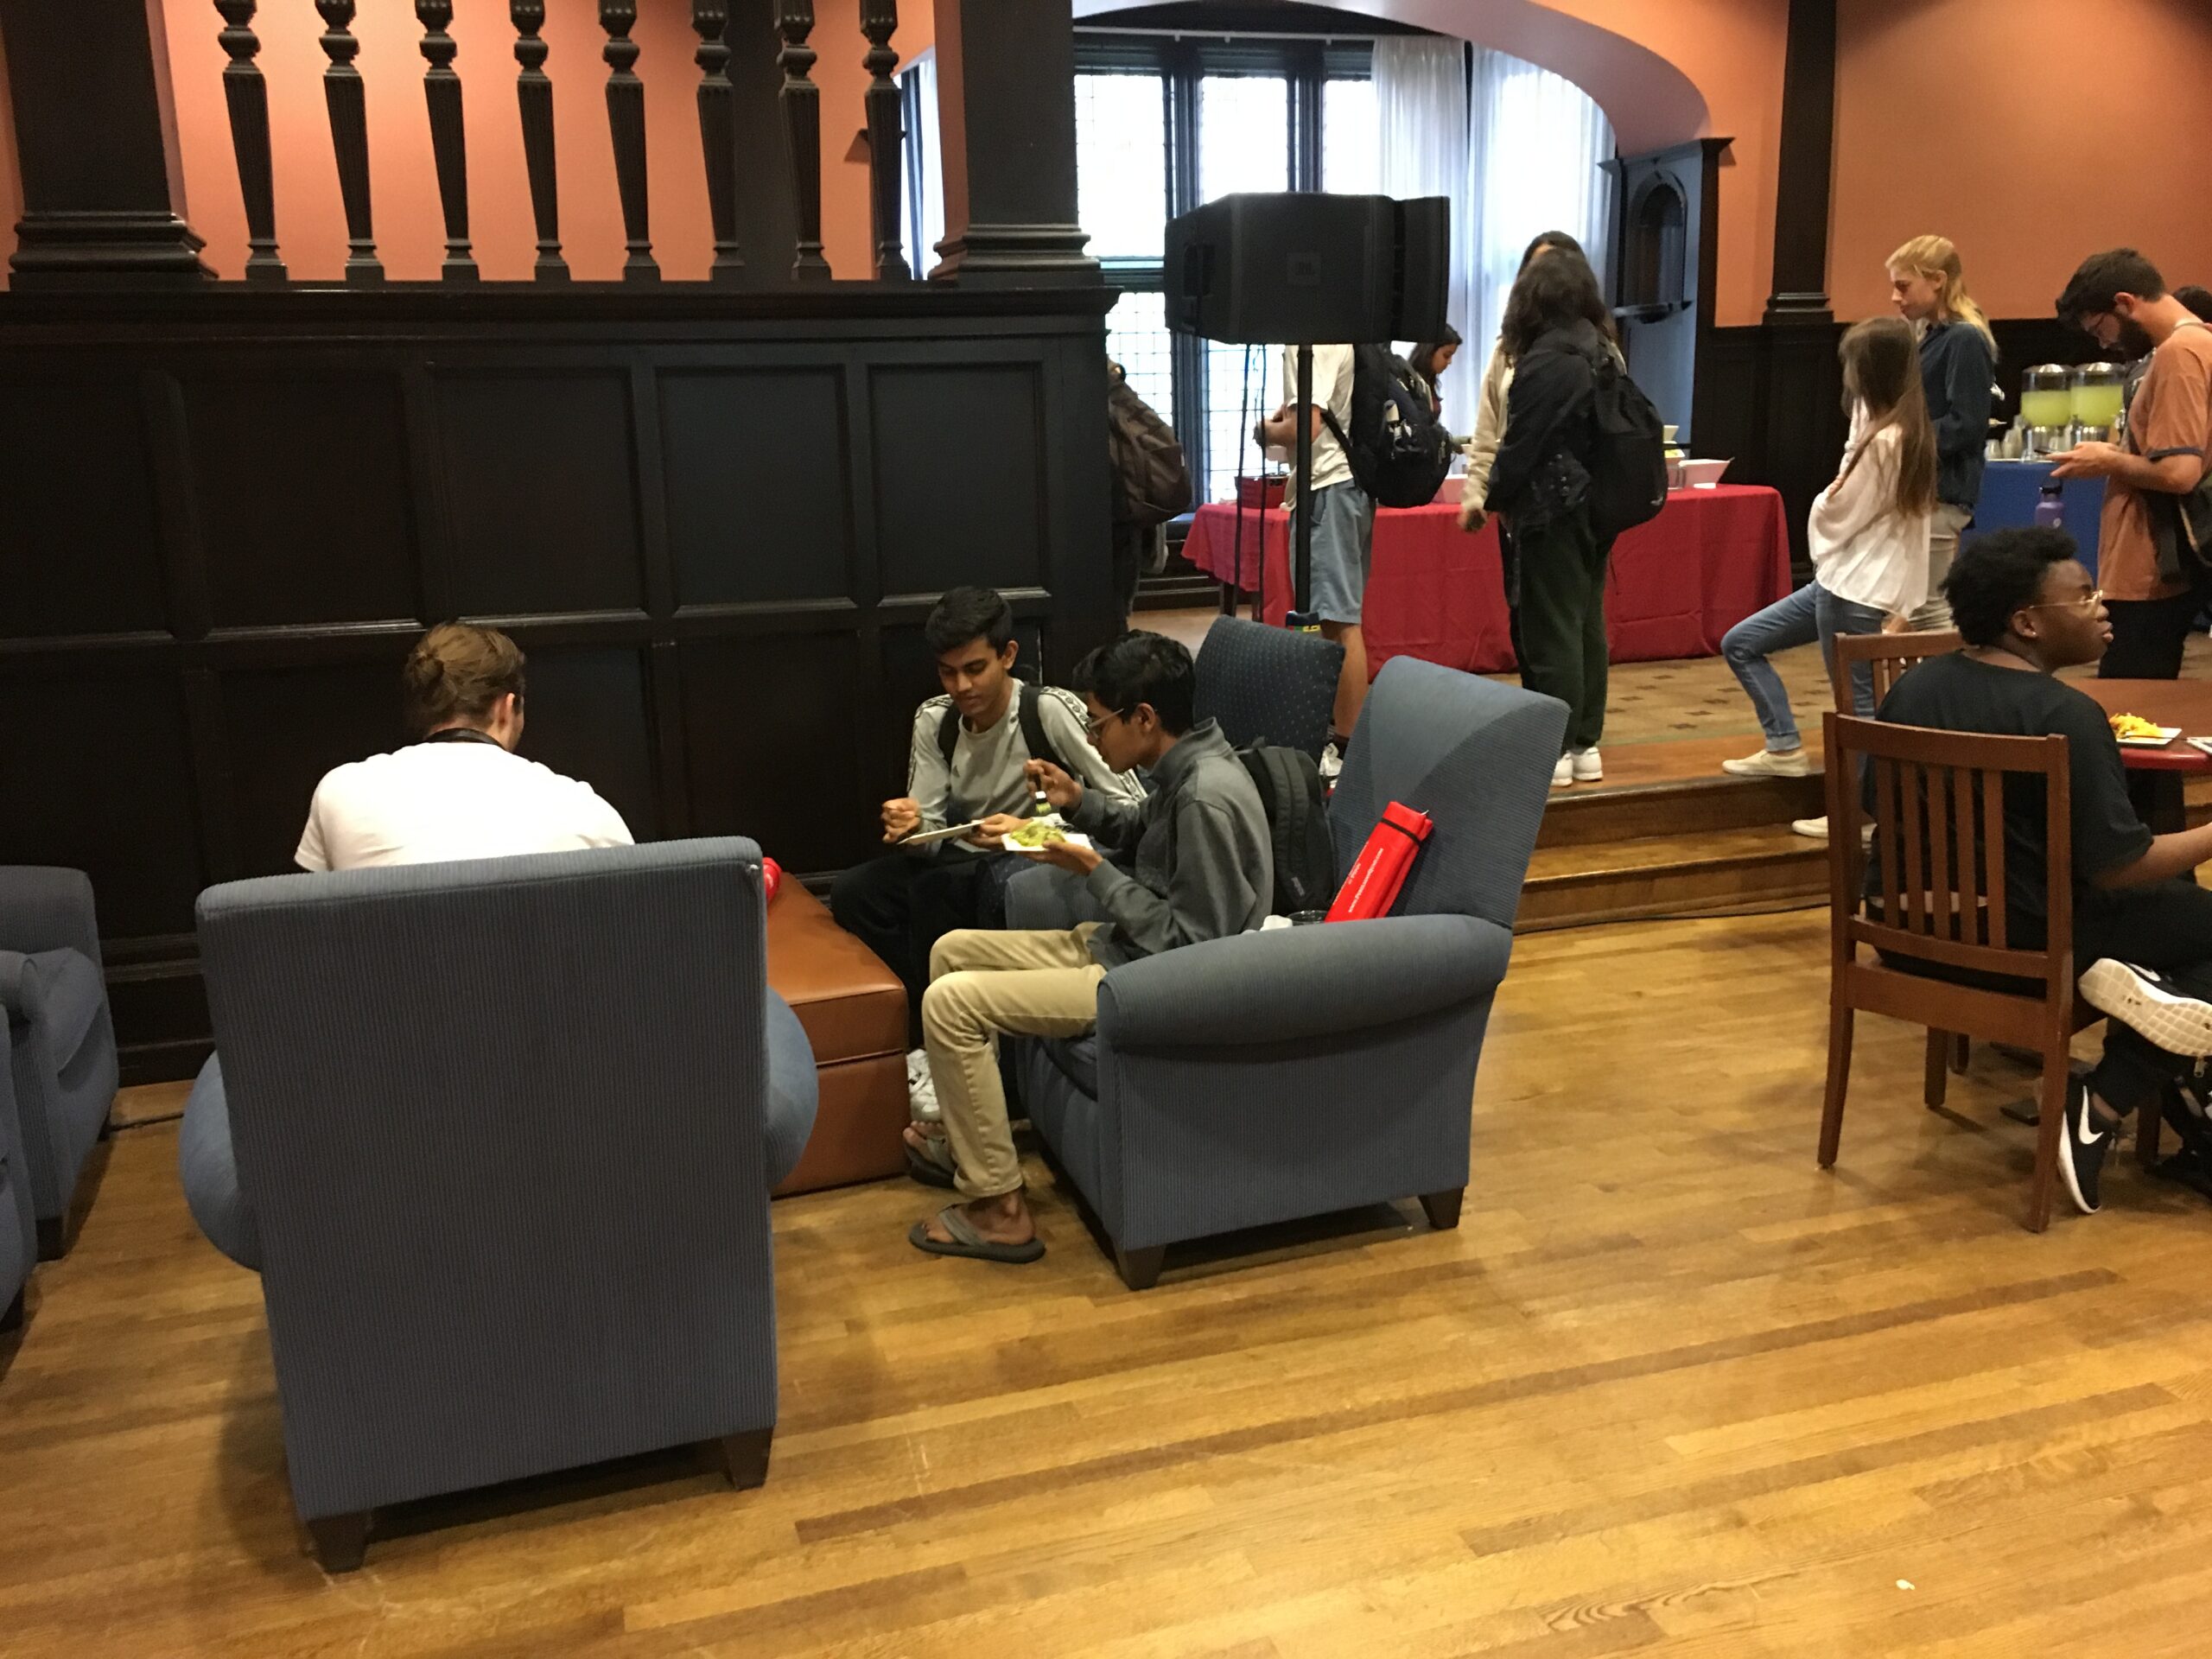 Students relaxing at cafe tables and lounge furniture enjoying the Houston Hall Market's new tasting menu